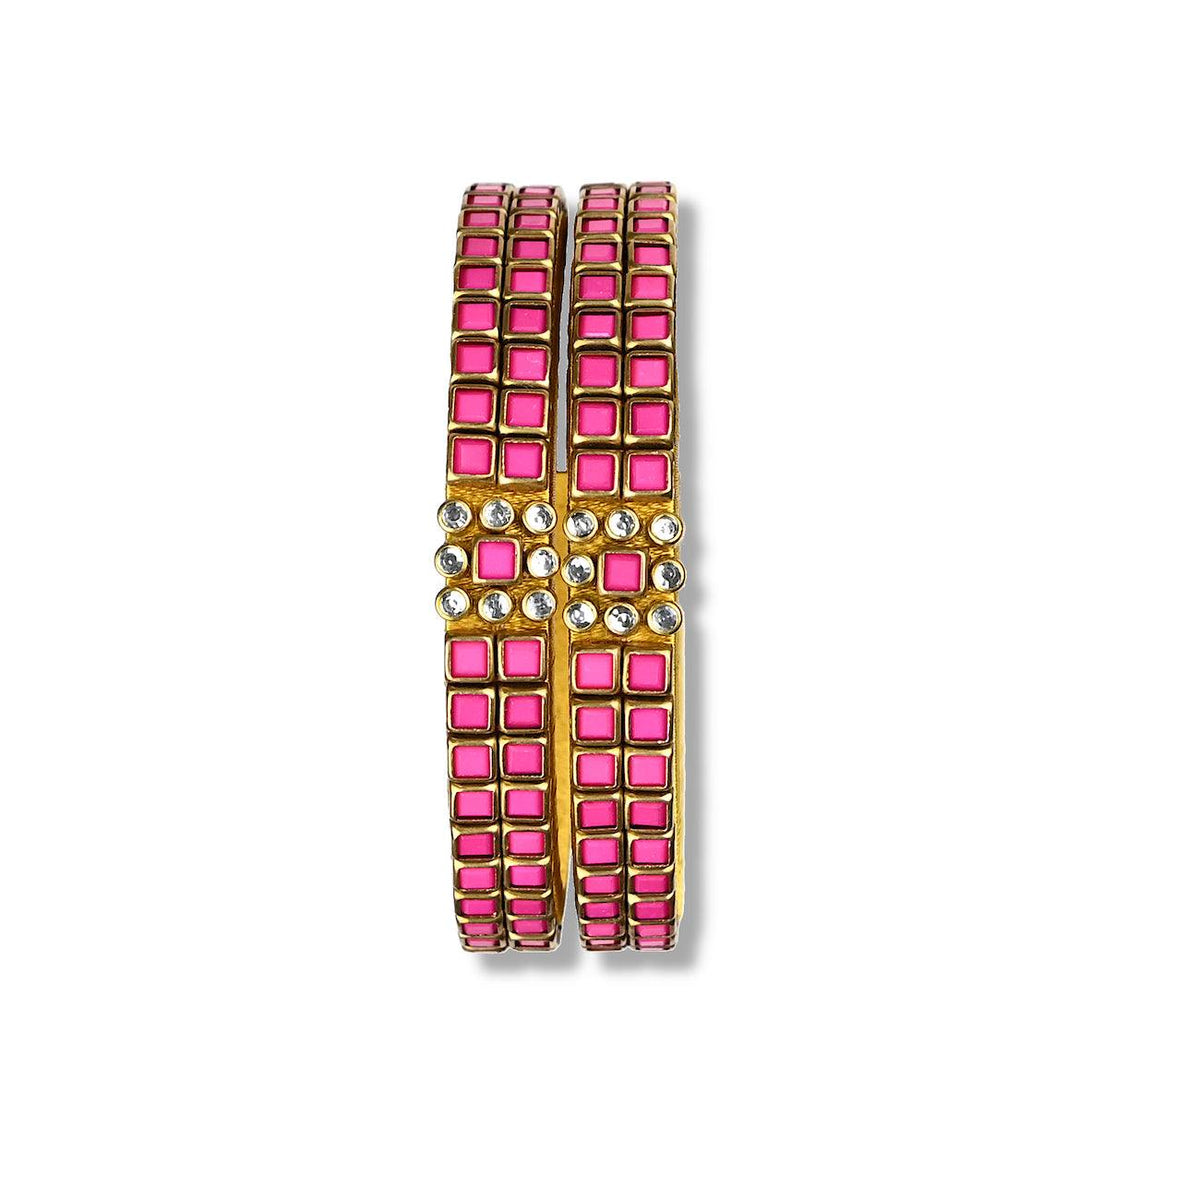 Pink Kundan stone bangle decorated with dark pink and glass colored Kundan stone bezels in square & circle shape over gold silk threads.